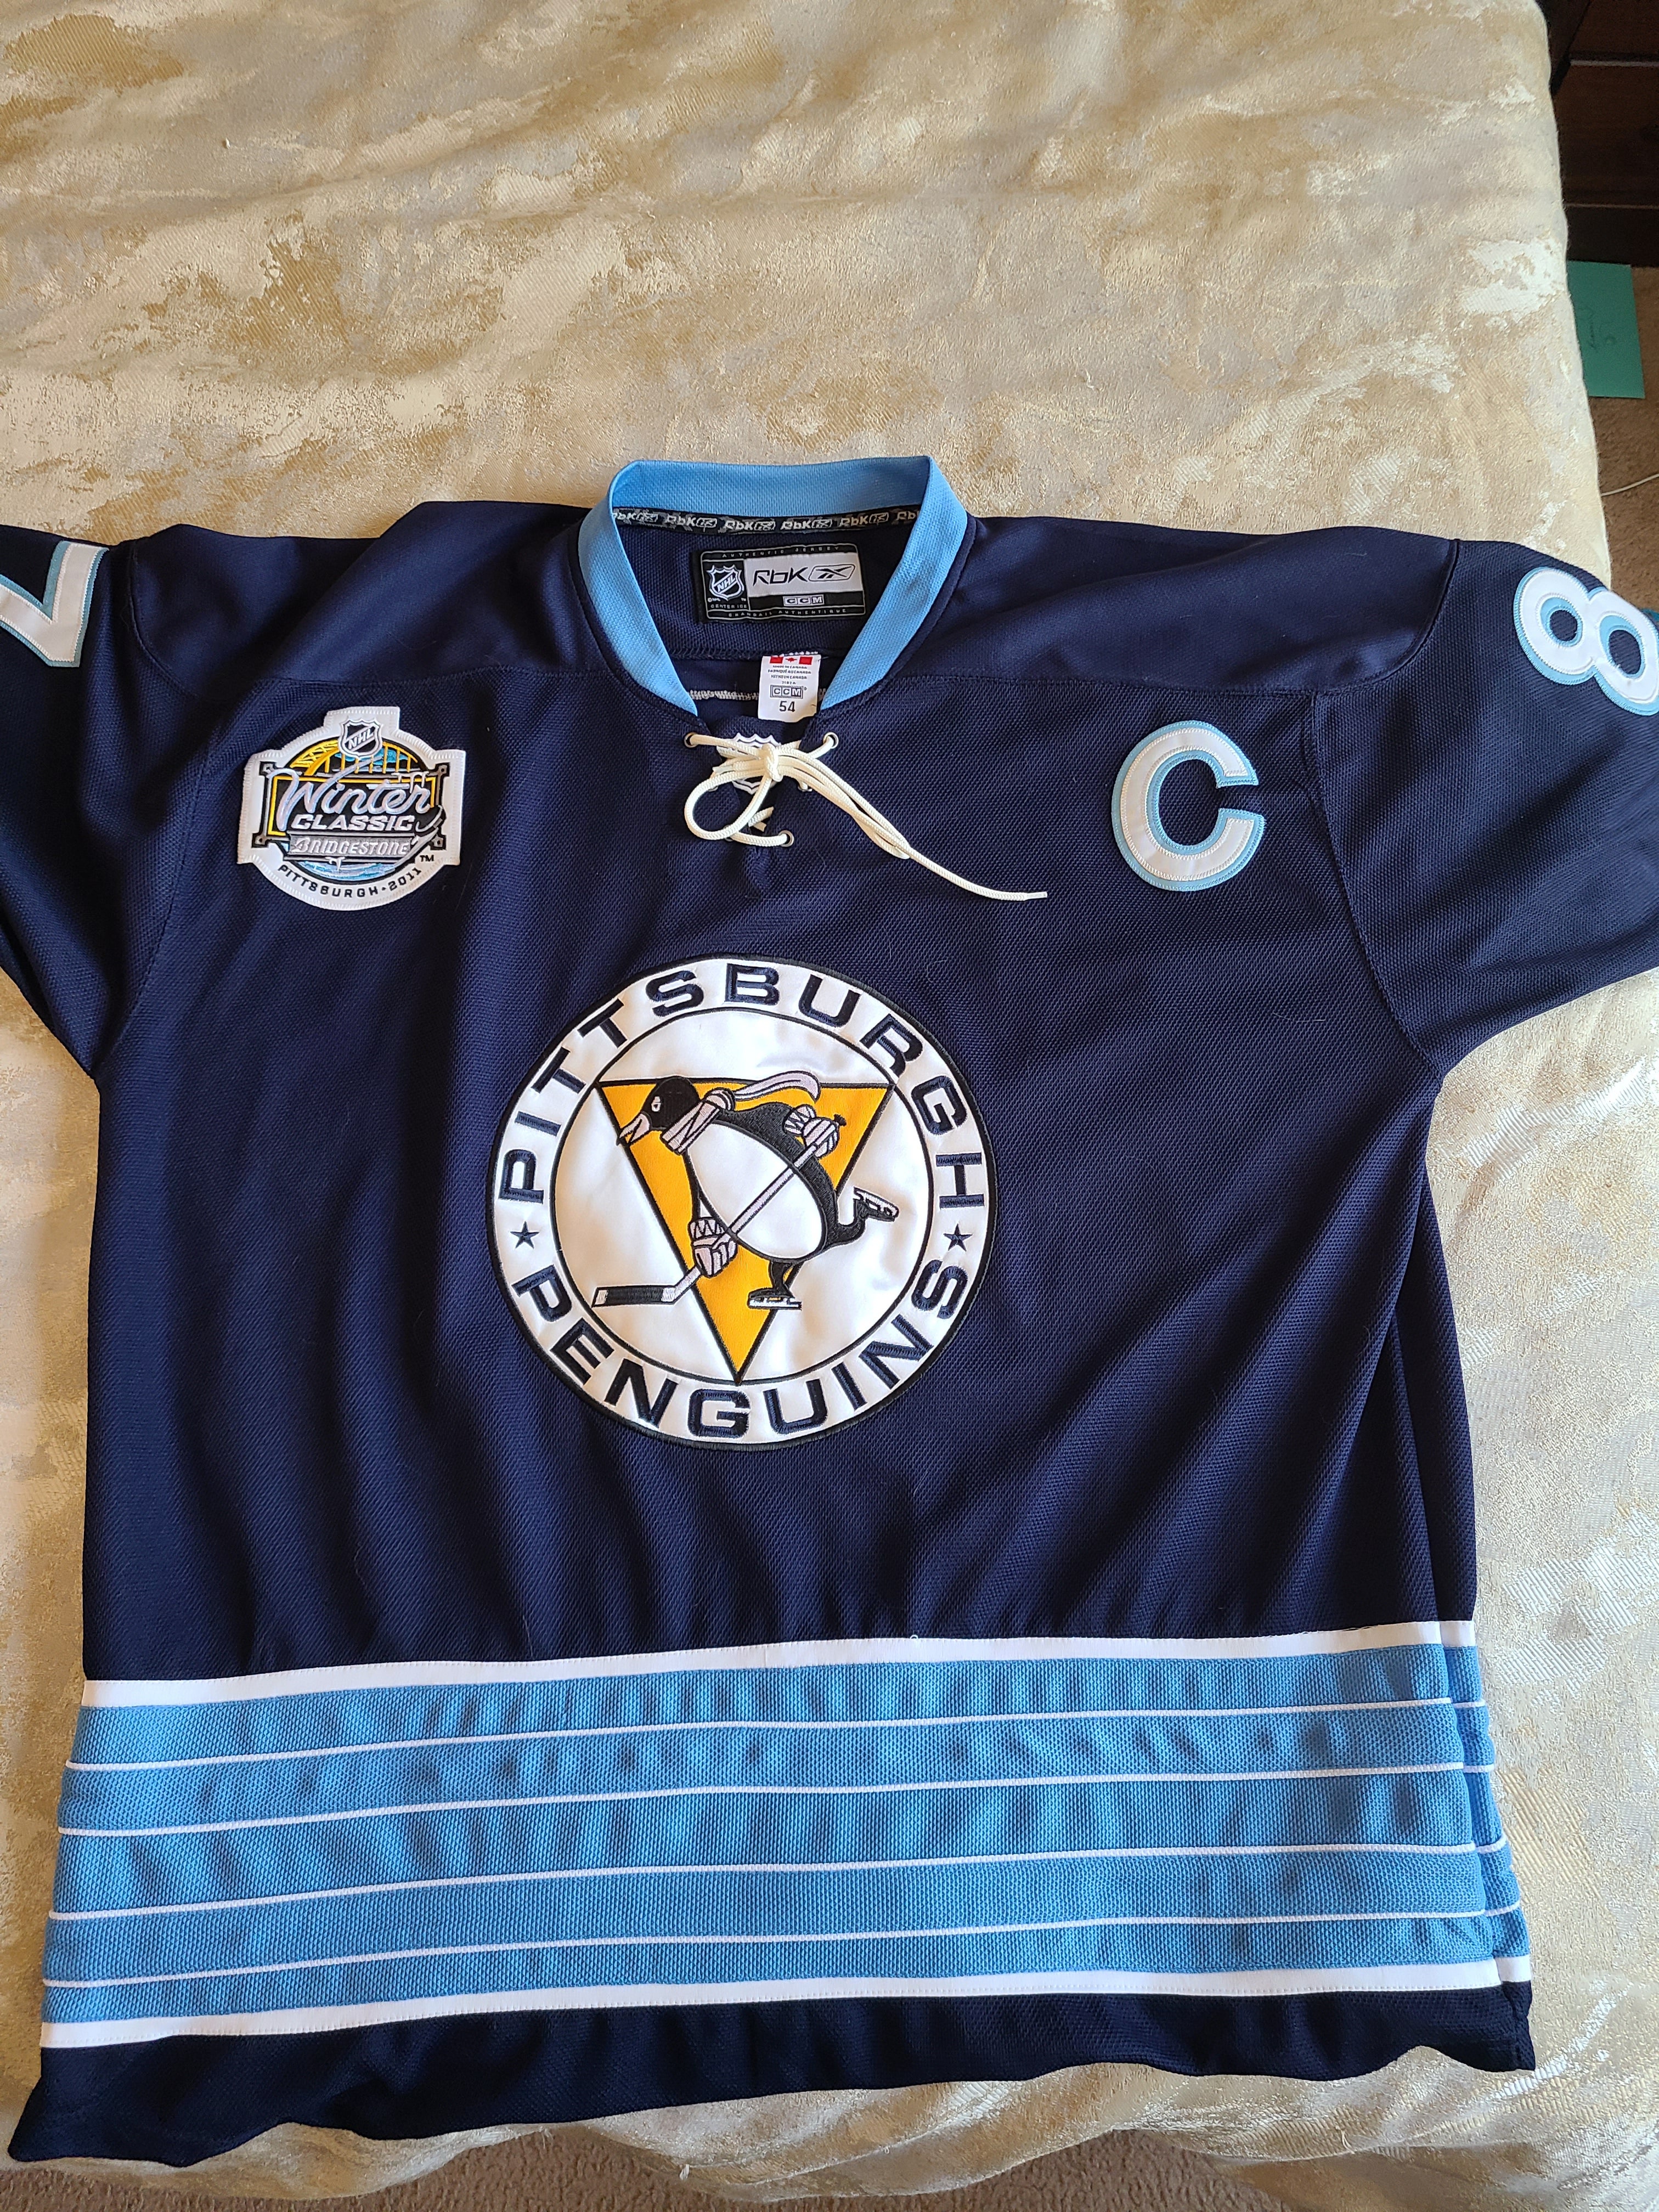 Authentic Penguins Sidney Crosby 2011 Winter Classic Jersey